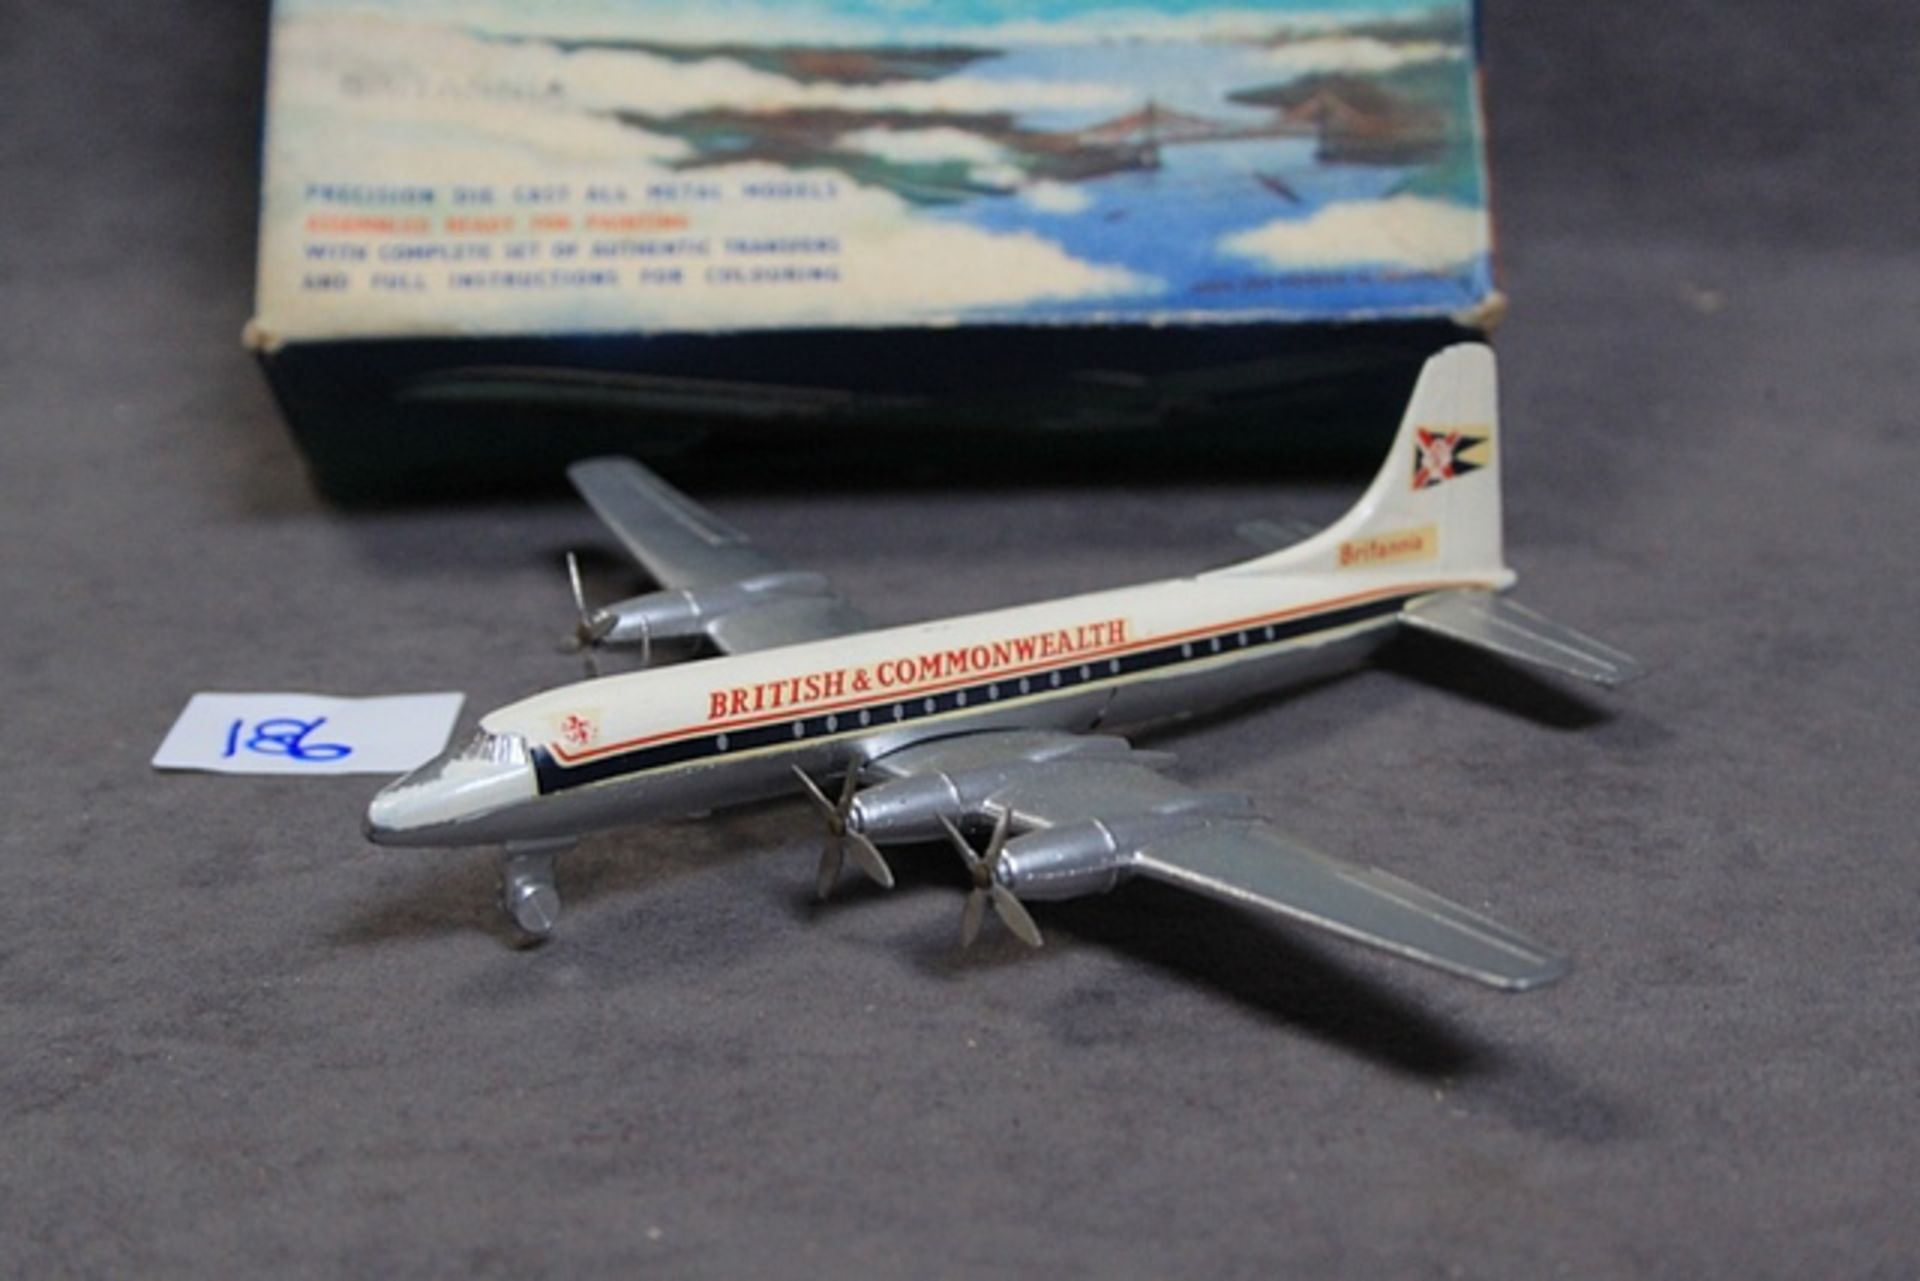 Lone Star Aircraft of the World 1/250th scale Diecast British And Commonwealth Decal - Image 2 of 2